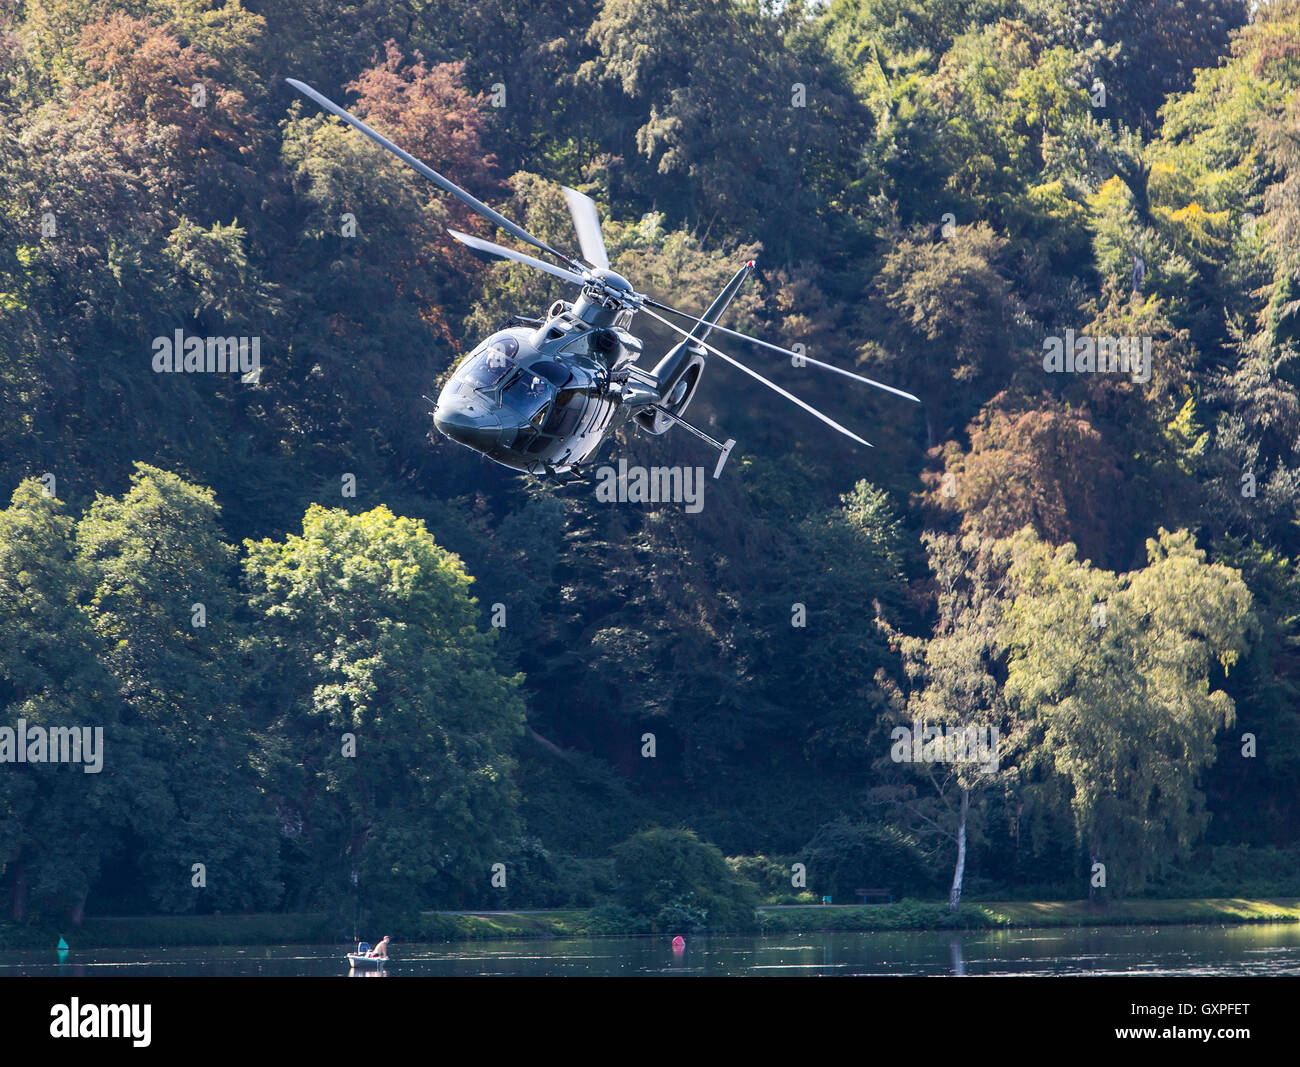 Exercise of a SWAT team, German police, anti Terror police unit, fast roping from a helicopter, Stock Photo